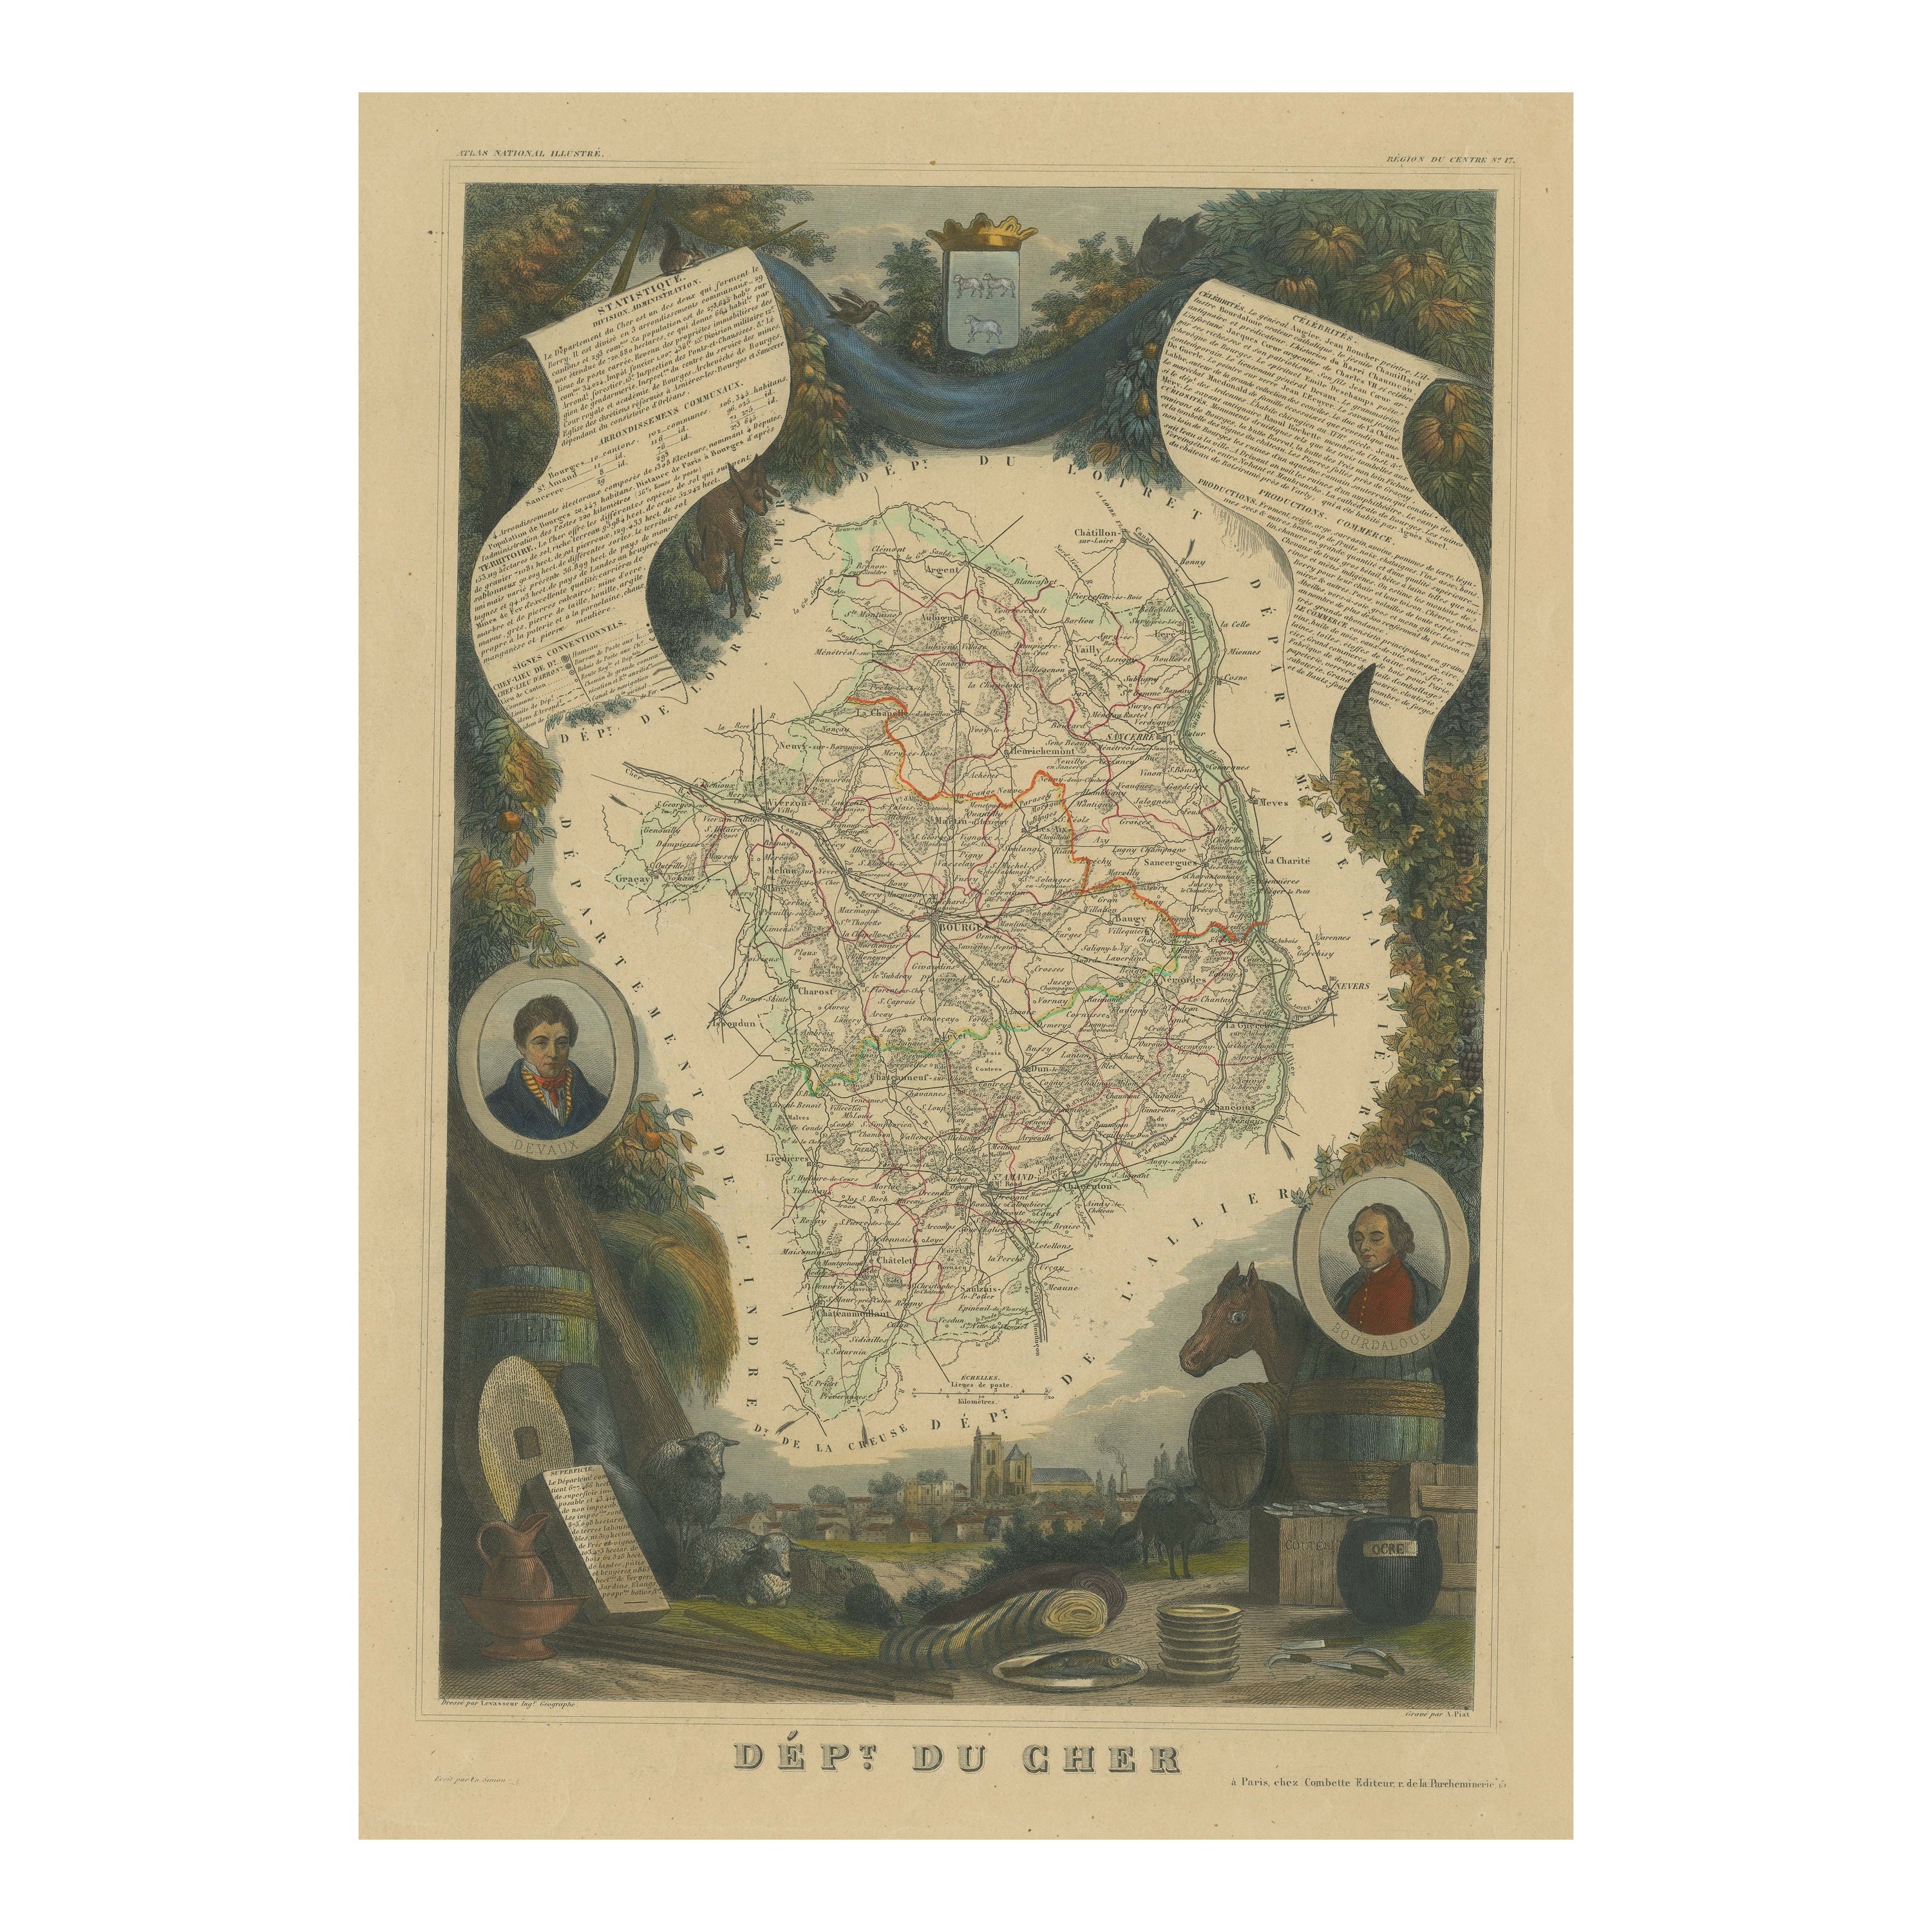 Hand Colored Antique Map of the Department of Cher, France